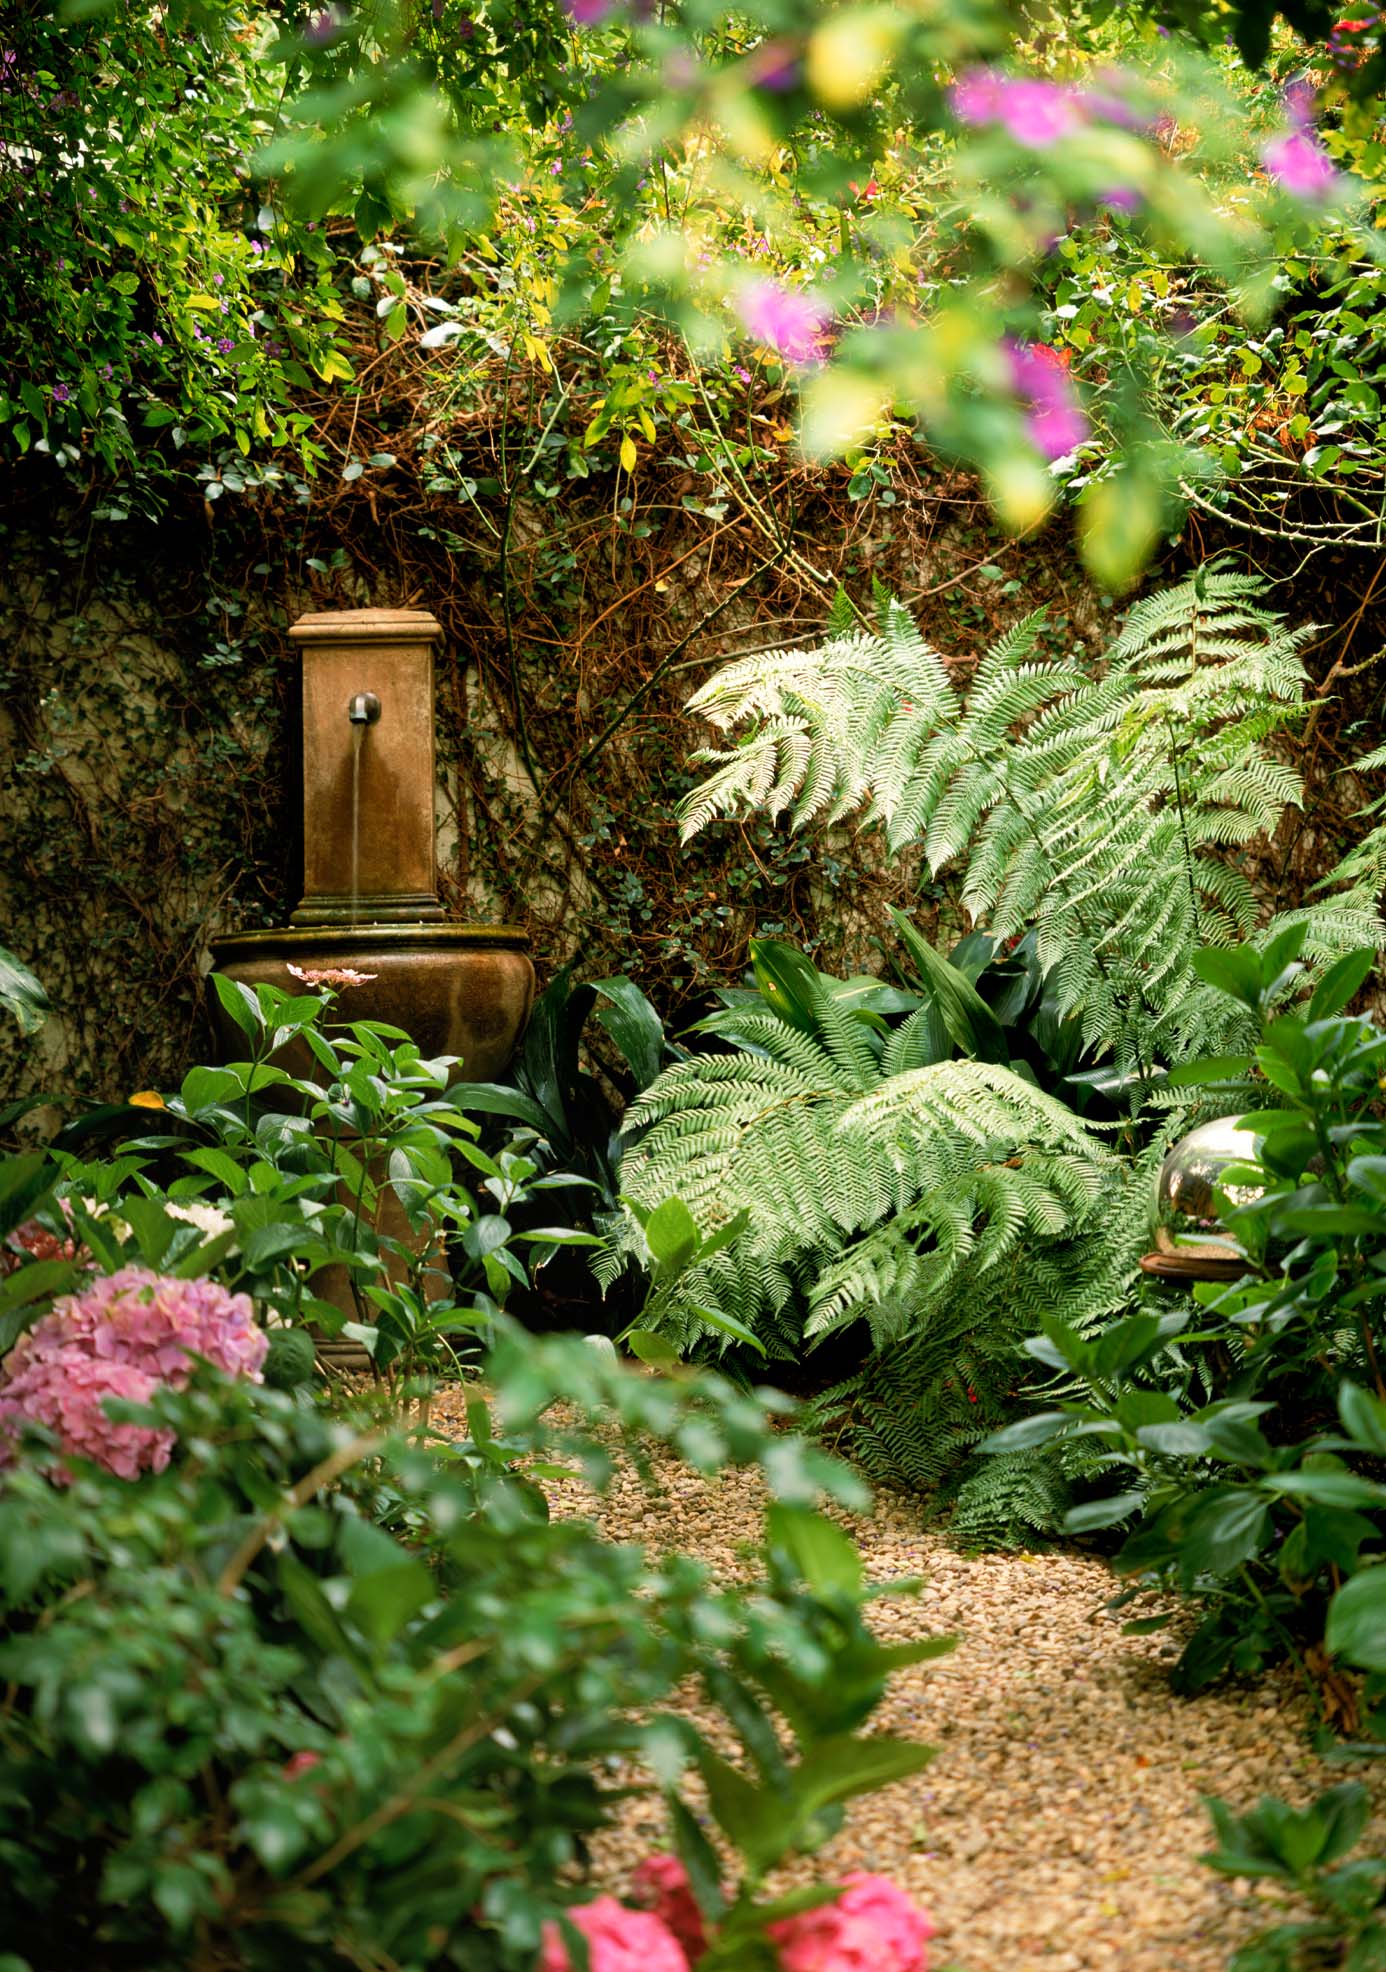 Entry garden: Shade-loving ferns and hydrangea greet visitors in the inviting entry courtyard.